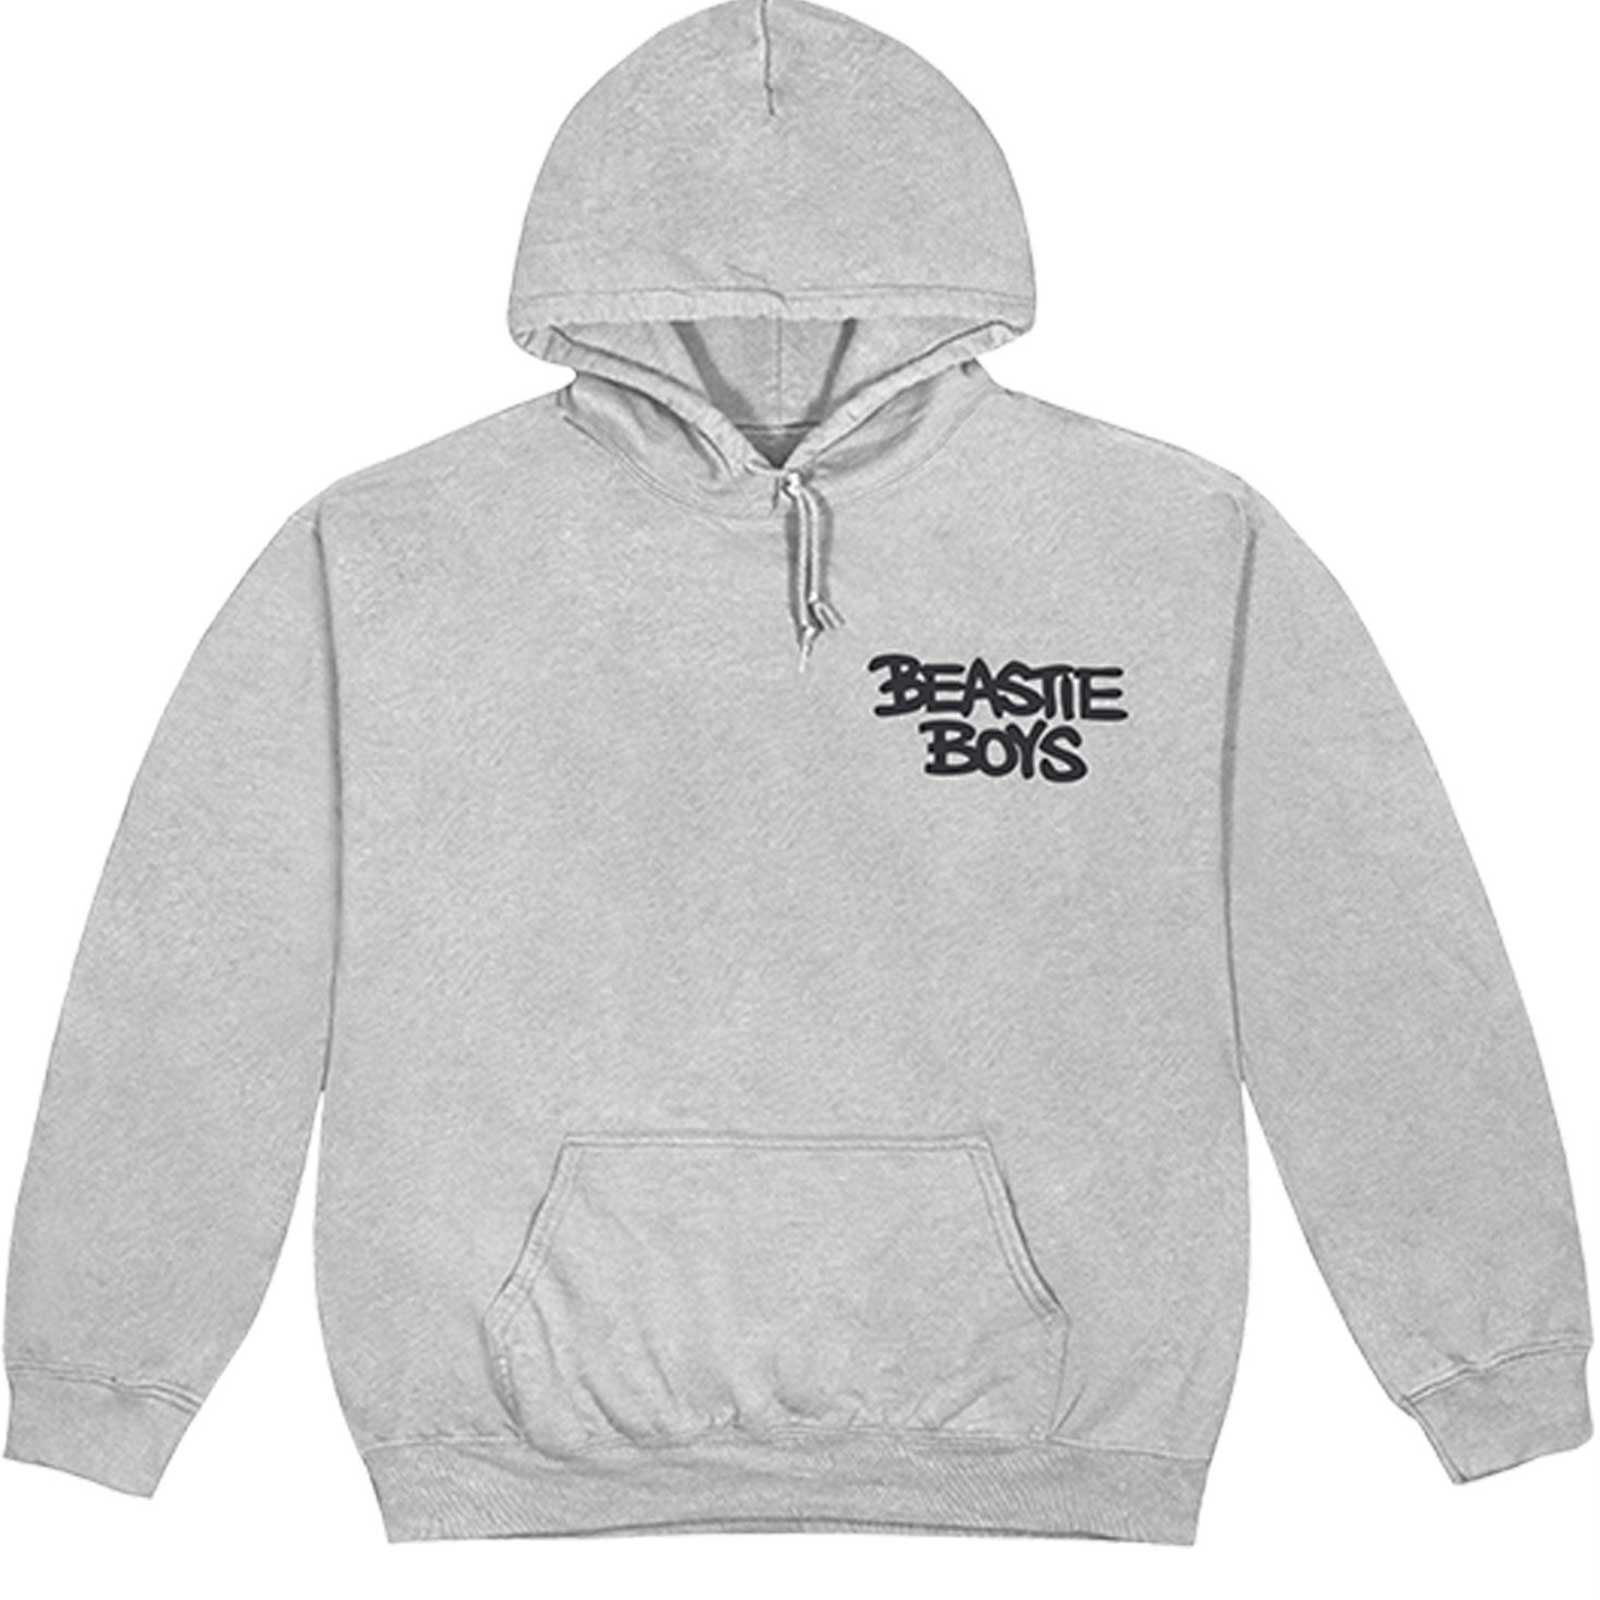 The Beastie Boys Unisex Hoodie - Check Your Head - Grey Official Licensed Design